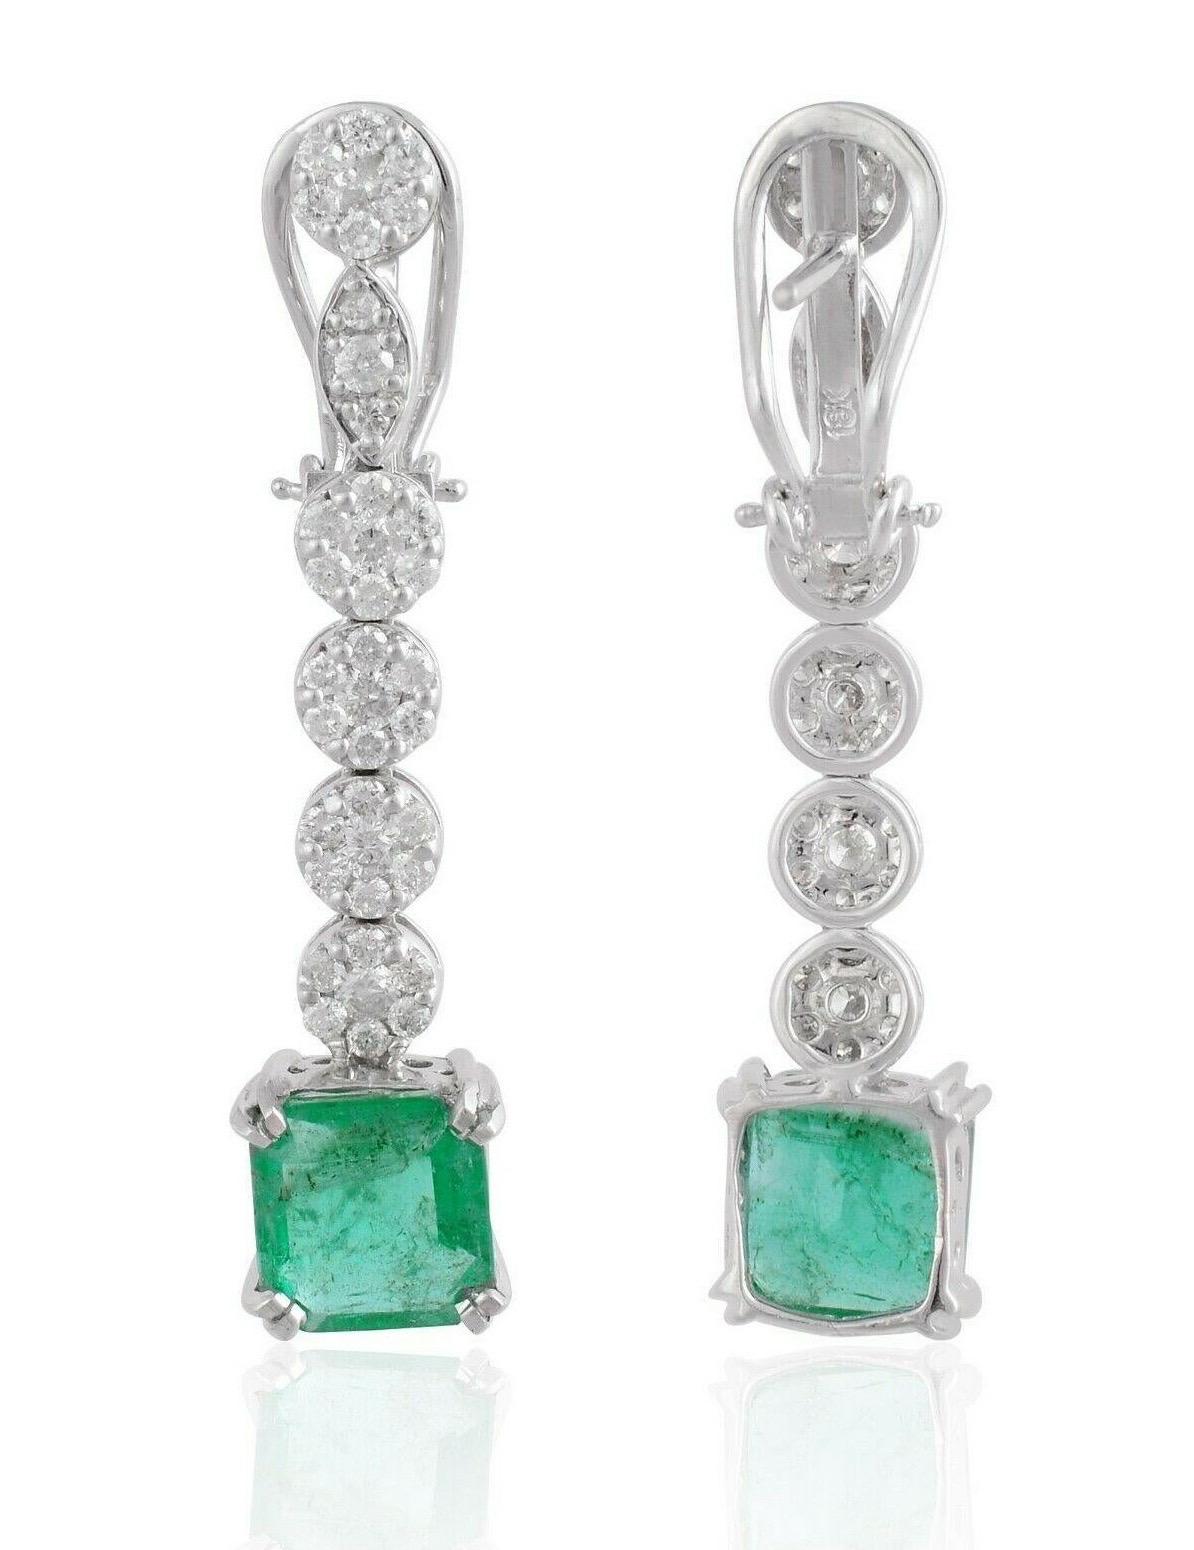 These beautiful earrings are handcrafted in 18-karat white gold. It is set in 6.65 carats emerald and 1.70 carats of sparkling diamonds.

FOLLOW MEGHNA JEWELS storefront to view the latest collection & exclusive pieces. Meghna Jewels is proudly